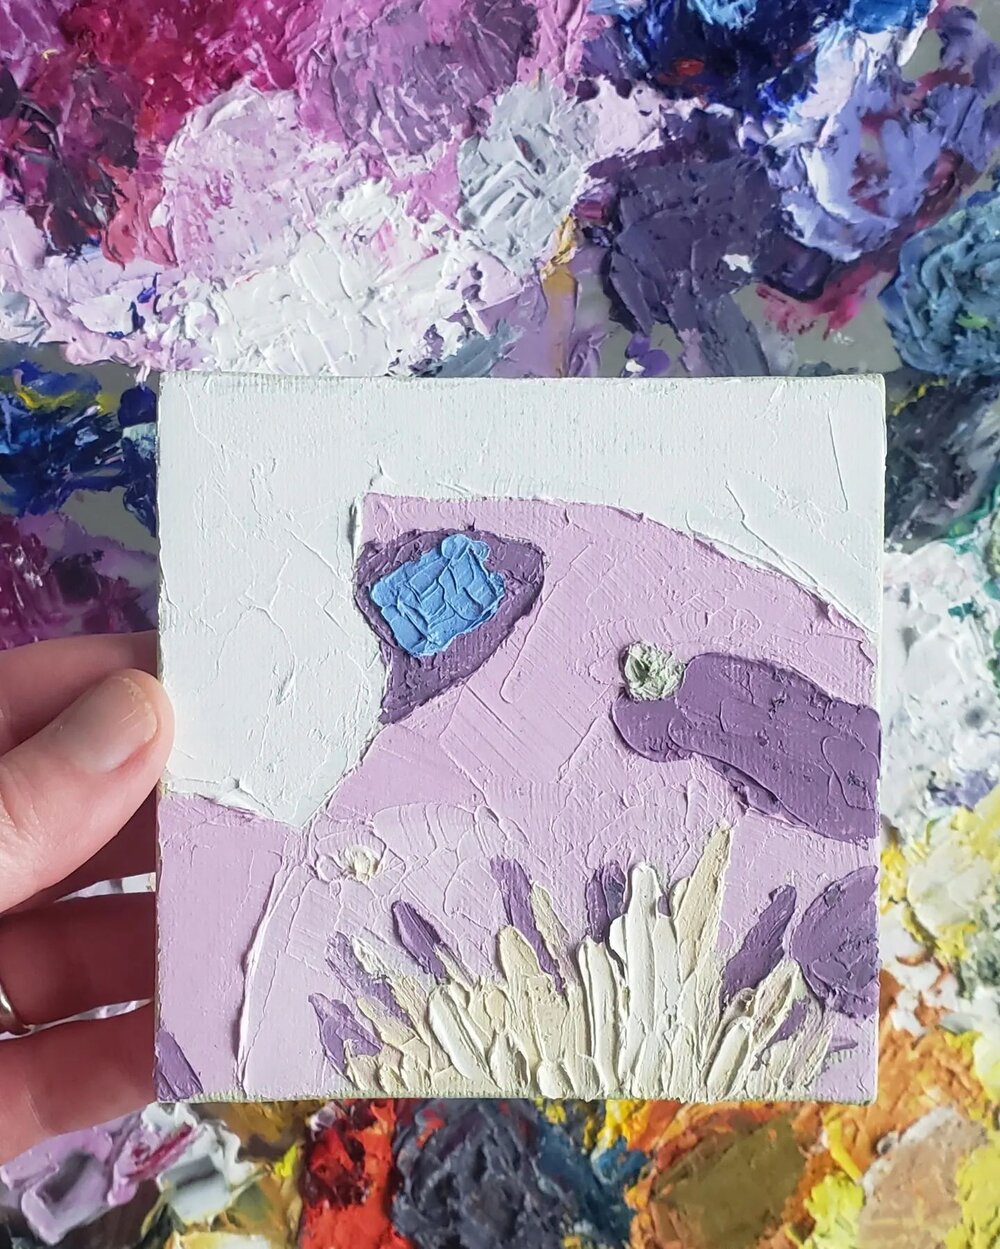 26/31 #31daysofcreativepractice2024 

Thanks for all the love on yesterday's small painting, I'd like to do more paintings like that one 😁. I quite like how this one turned out. 

Oil paint on panel, 4x4 inches

#nzartist #minioilpainting #paintingm